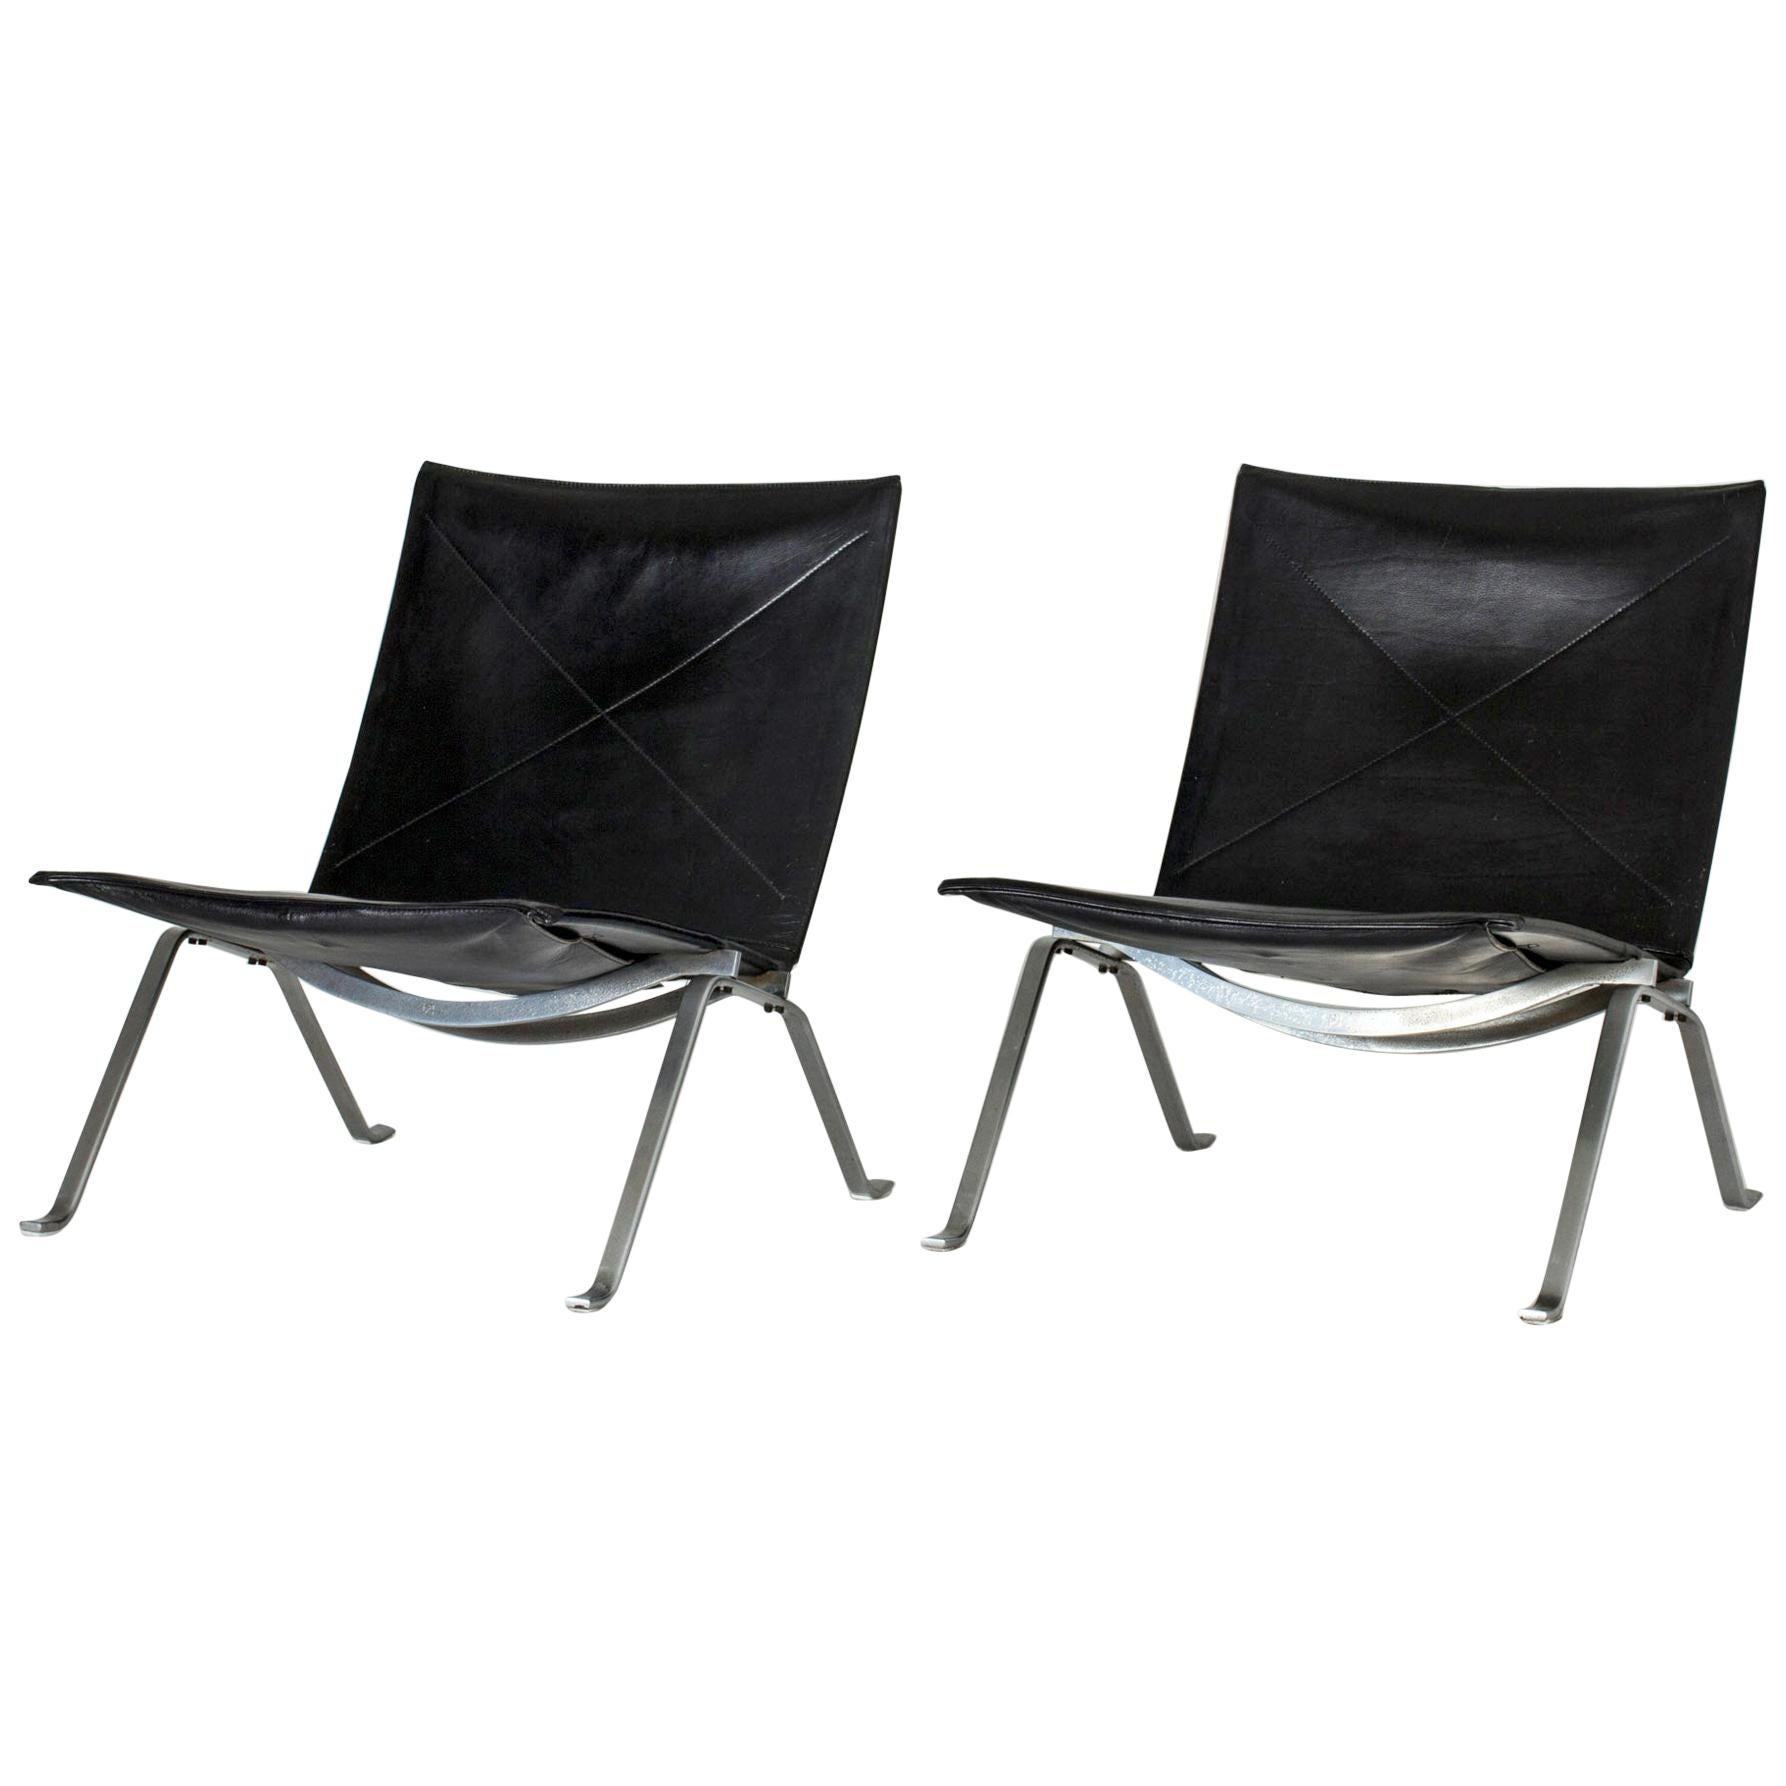 Pair of "PK 22" Lounge Chairs by Poul Kjærholm